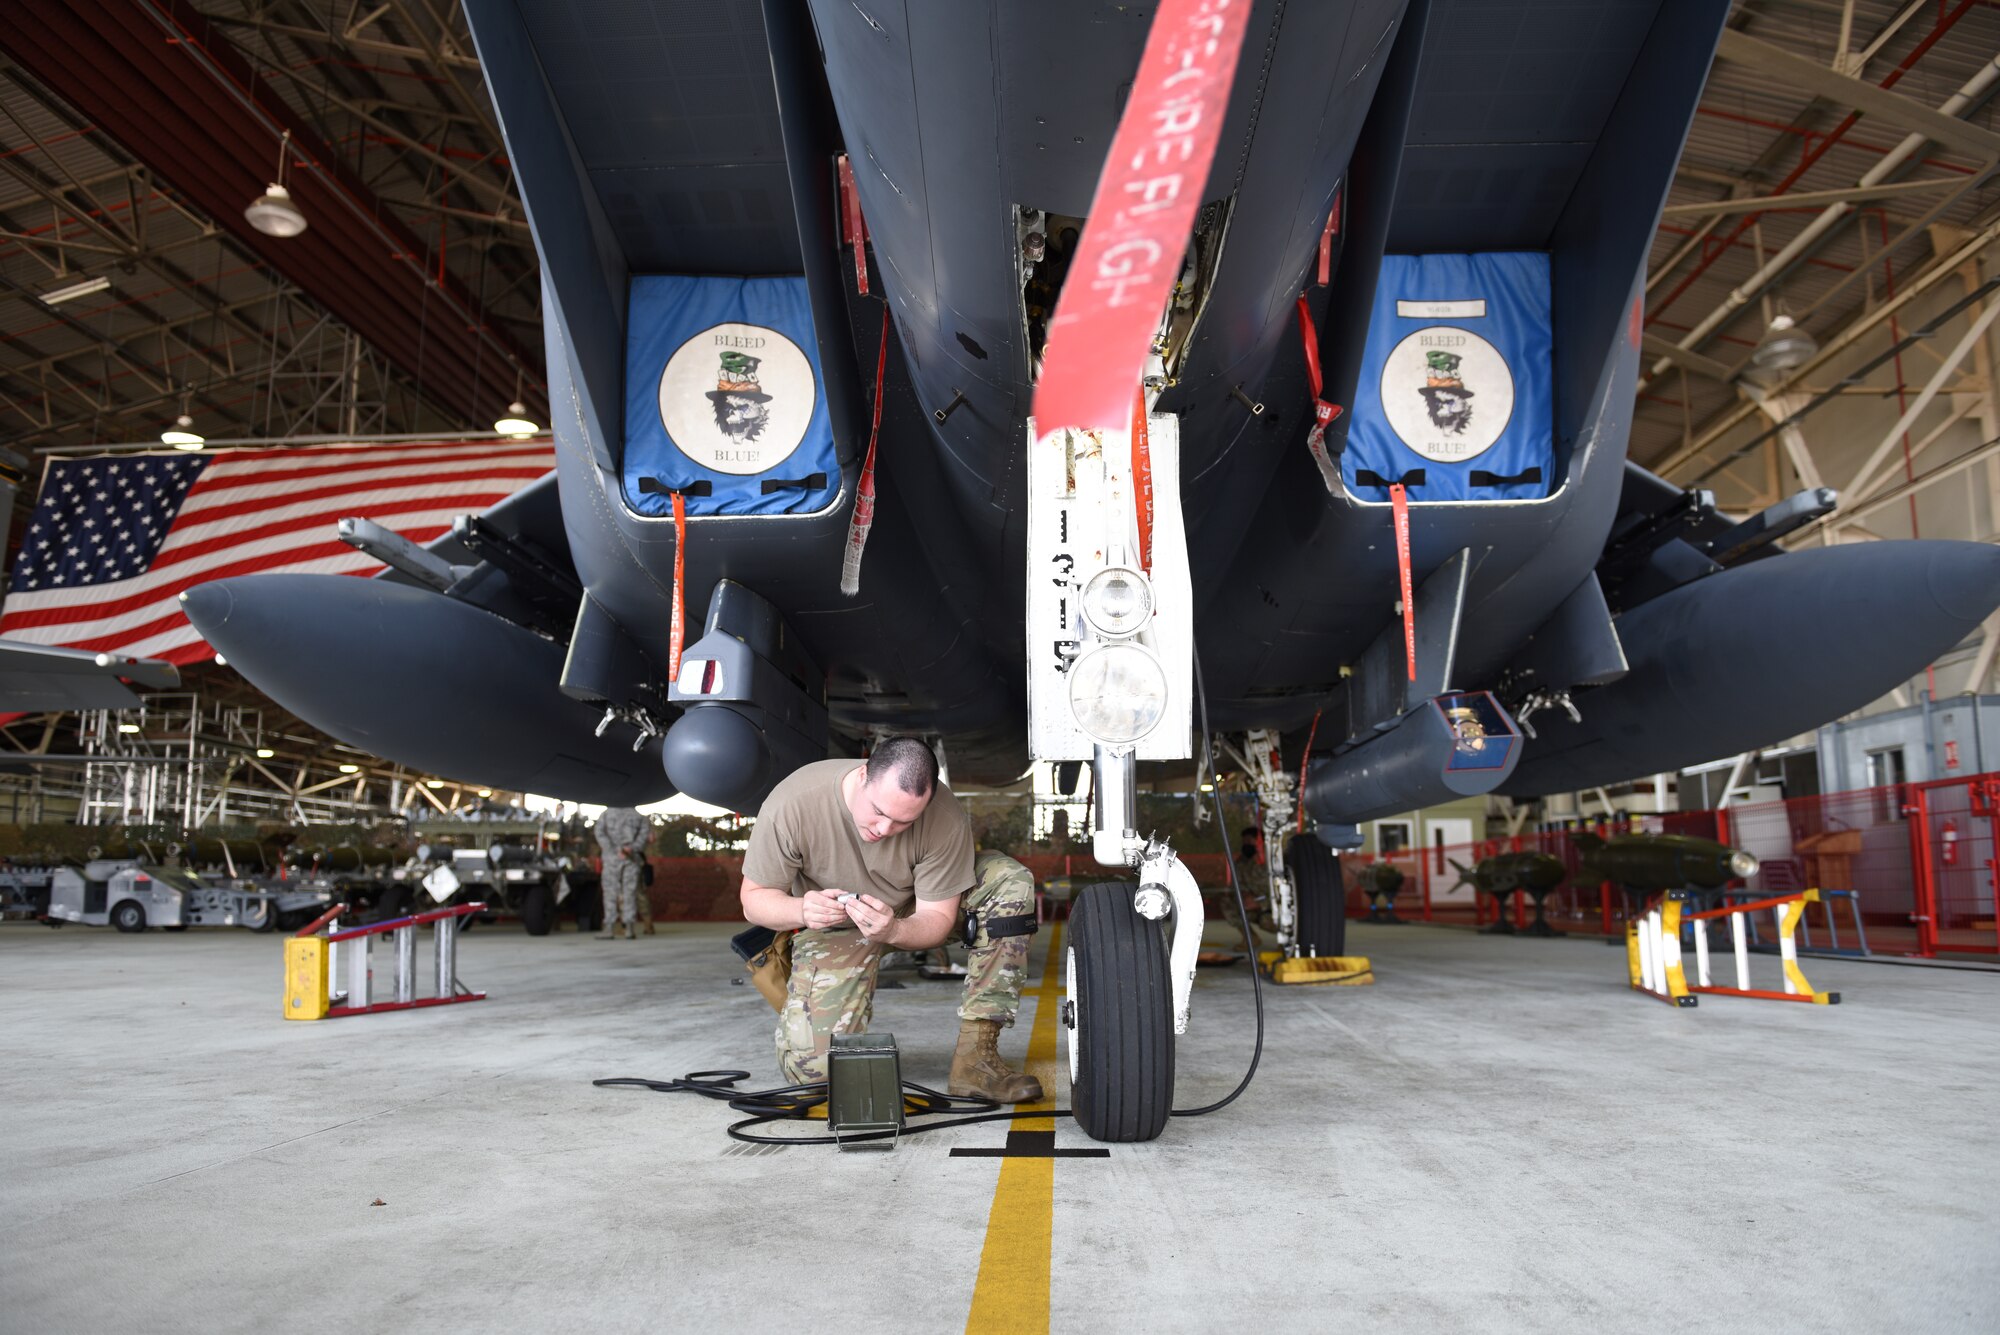 A Liberty Wing Airman assigned to the 492nd Fighter Squadron Aircraft Maintenance Unit inspects an F-15E Strike Eagle at Royal Air Force Lakenheath, England, June 26, 2020. Load crew competitions help Airmen test their speed and accuracy while focusing on safety and efficiency in a controlled environment. (U.S. Air Force photo by Airman 1st Class Rhonda Smith)